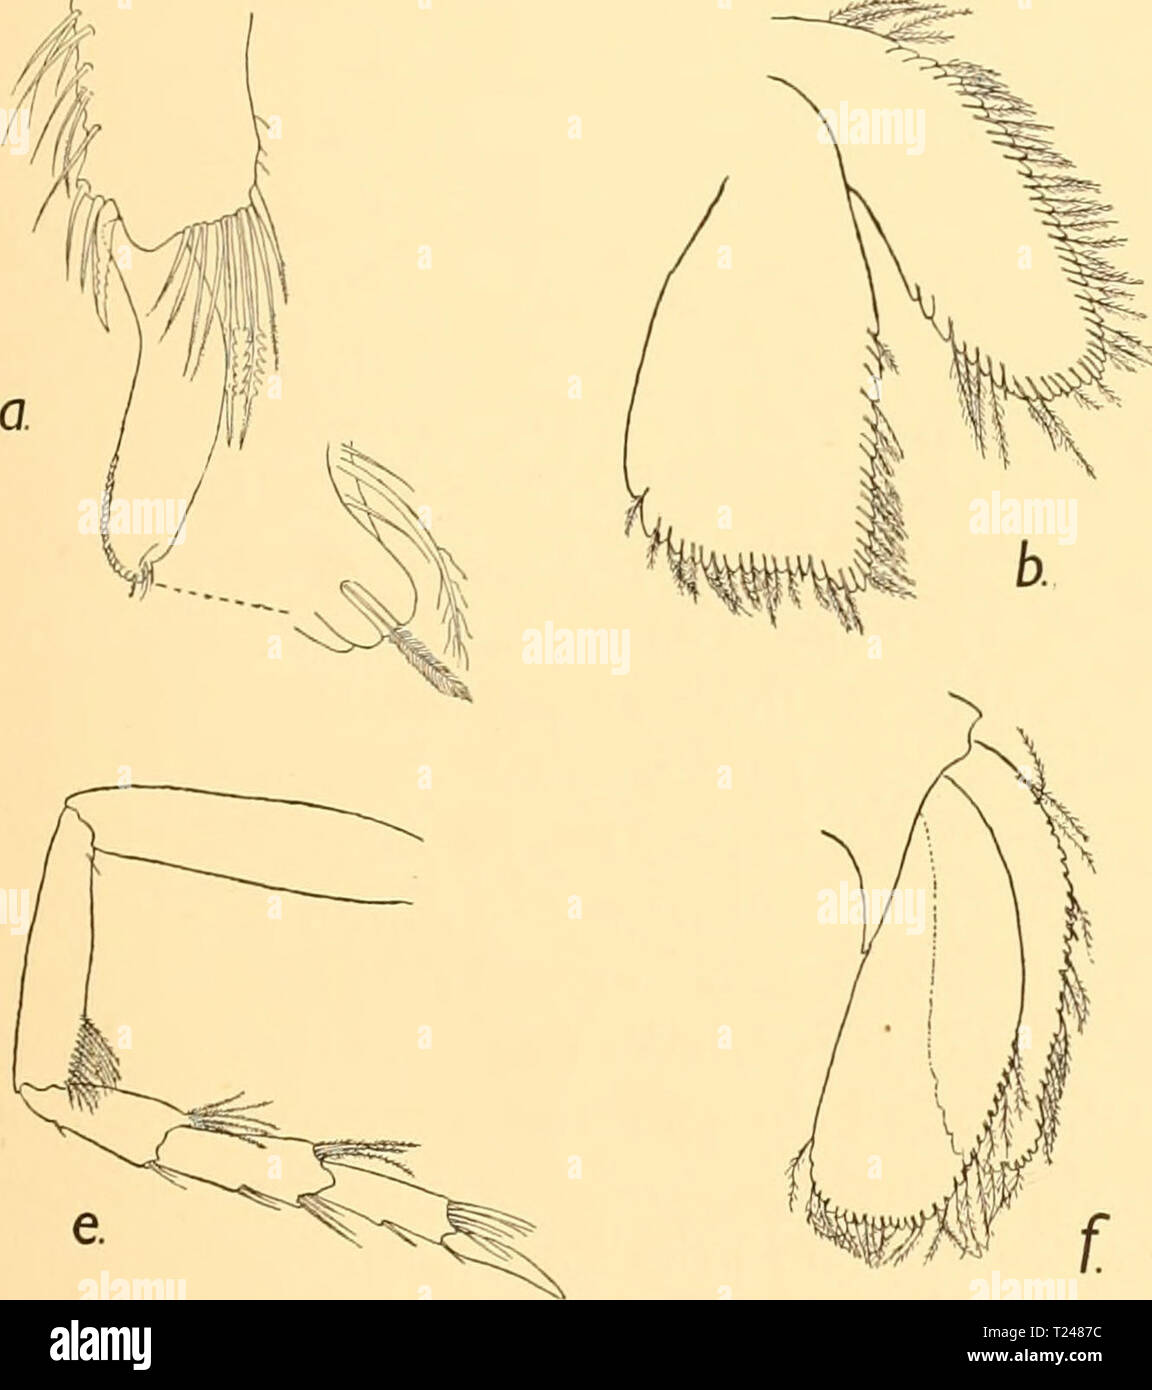 Archive image from page 350 of Discovery reports (1933) Discovery reports  discoveryreports07inst Year: 1933  DESCRIPTION OF SPECIES 289 distance beyond the outer, and with its rounded extremity fringed with delicate hairs. The exopod of the uropod is shorter than the endopod; the latter is broad, with its distal end obliquely truncated, and with the inner angle rounded and the outer pointed and slightly produced (Fig. 4 b). Colour. Pale brown, becoming darker in the middle of the body, with dark brown or black spots which vary considerably in number and size in different specimens. Distributi Stock Photo